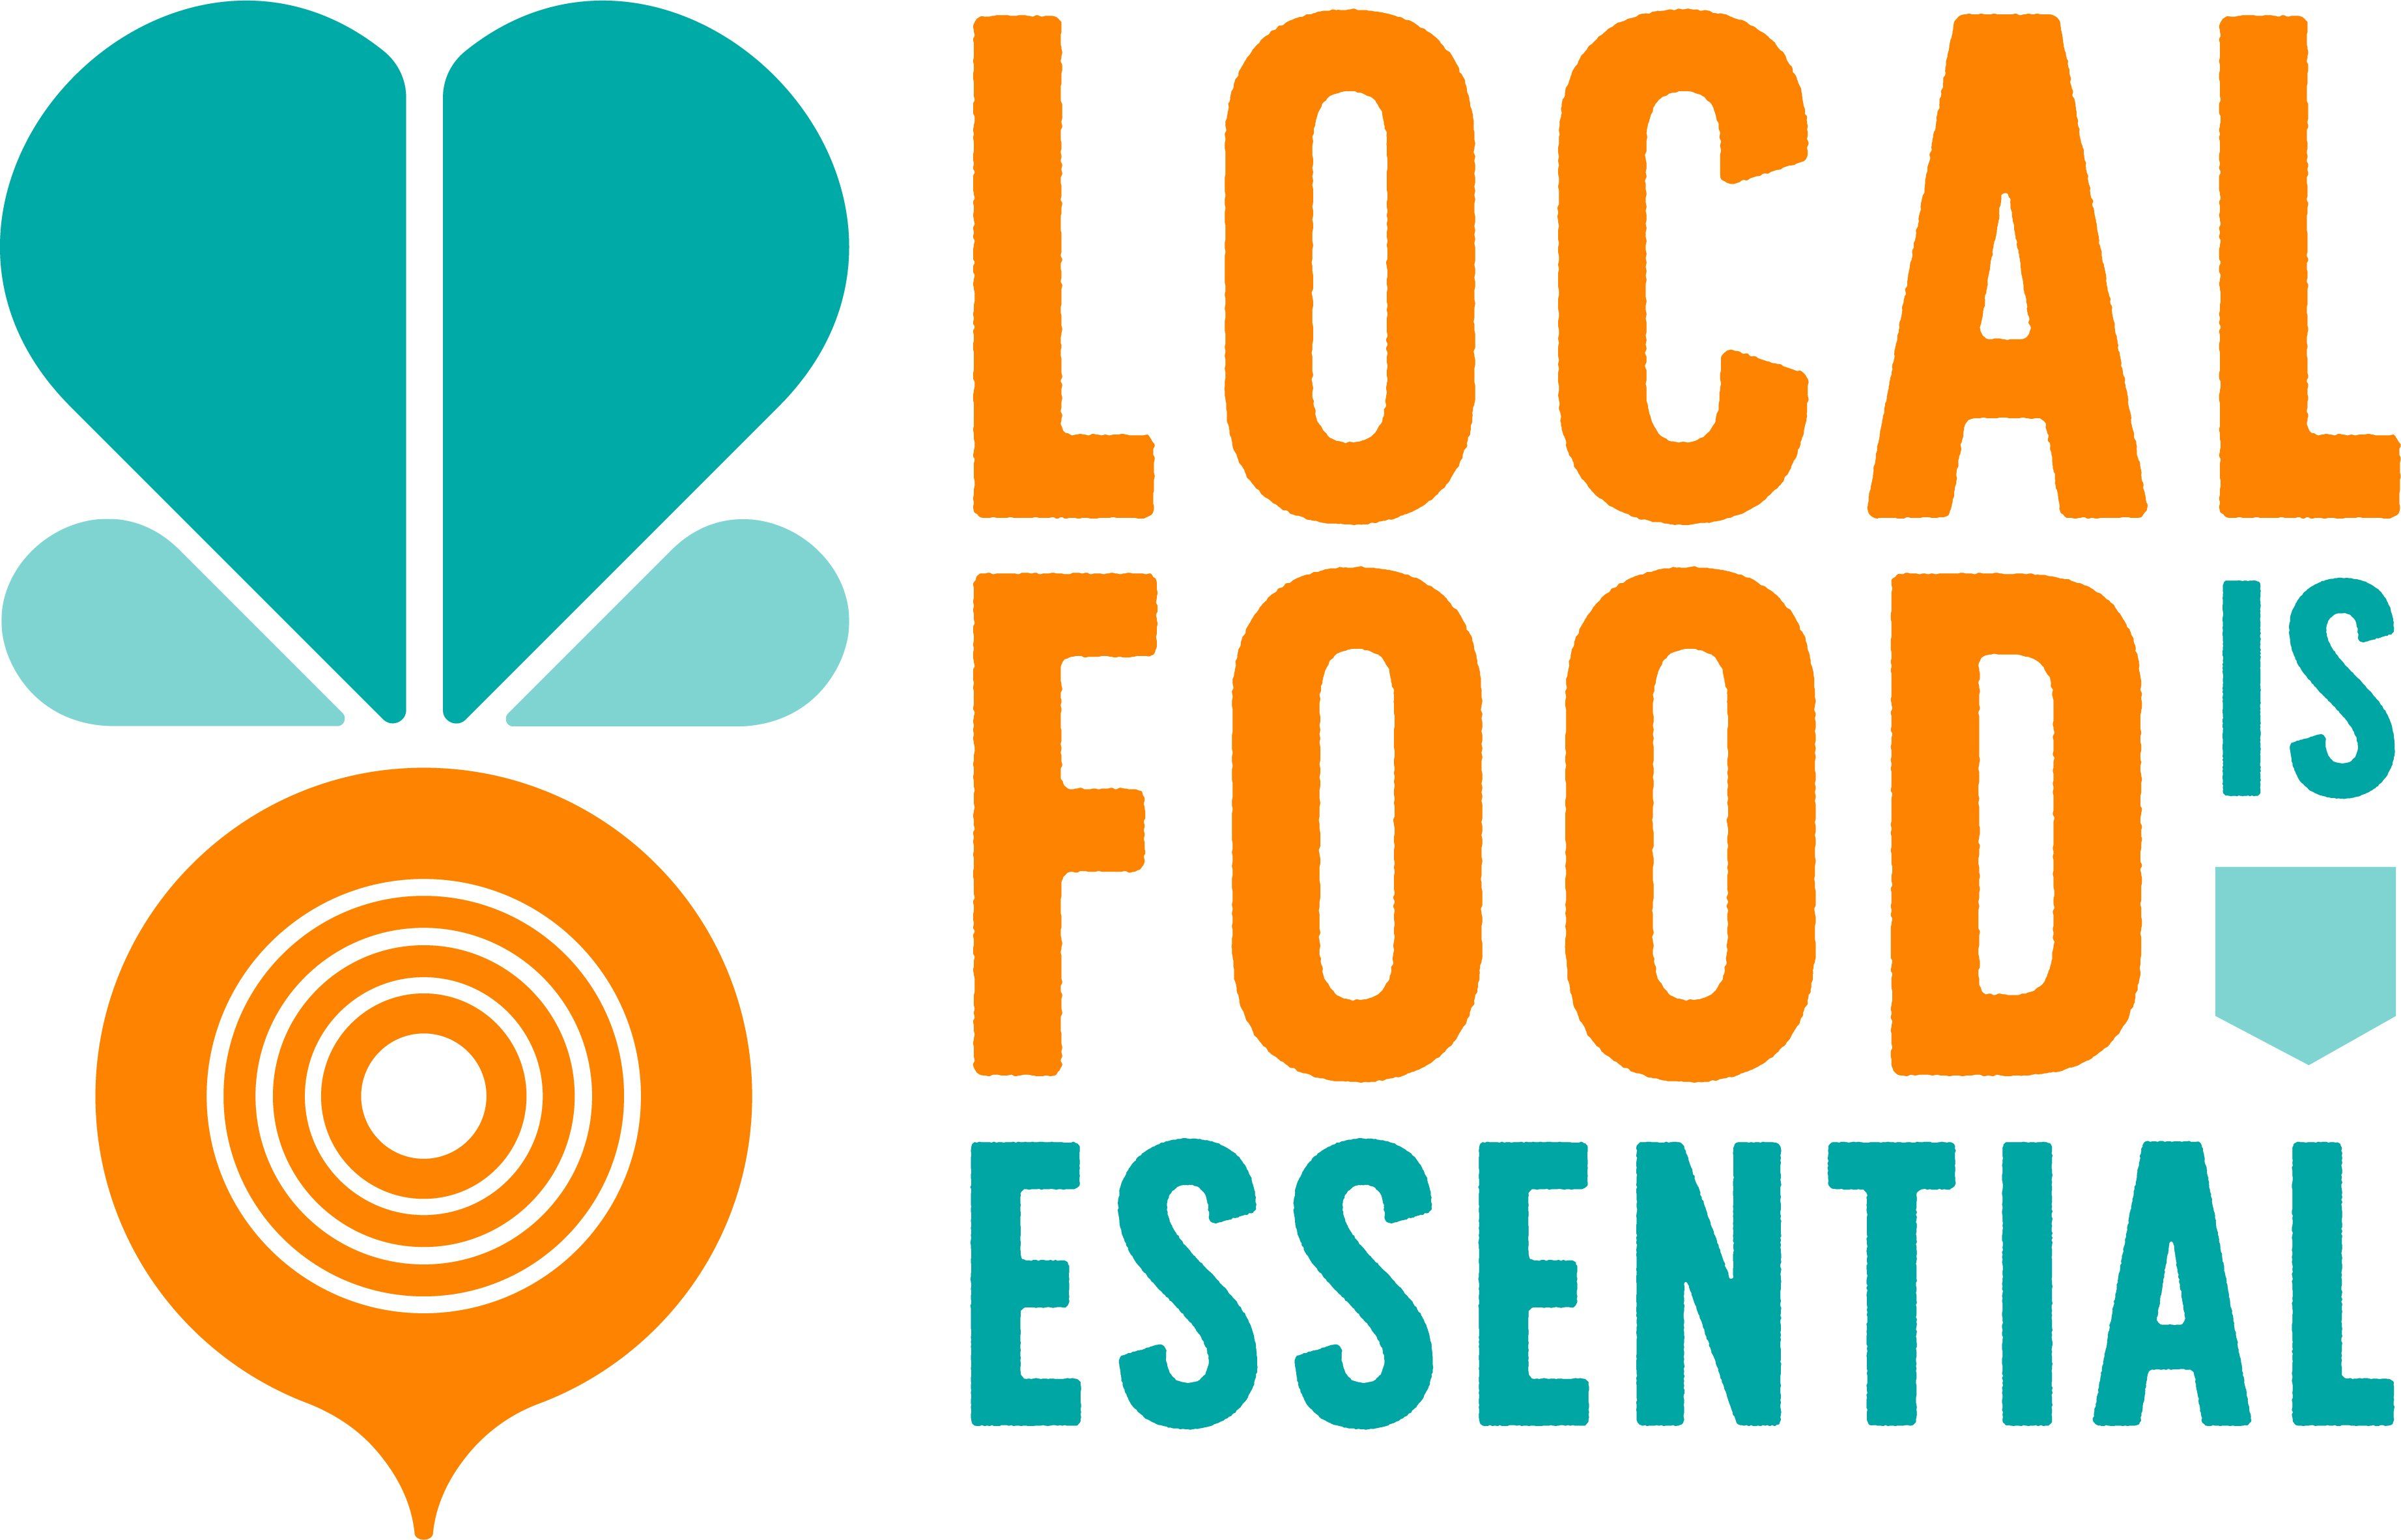 Local Food is Essential